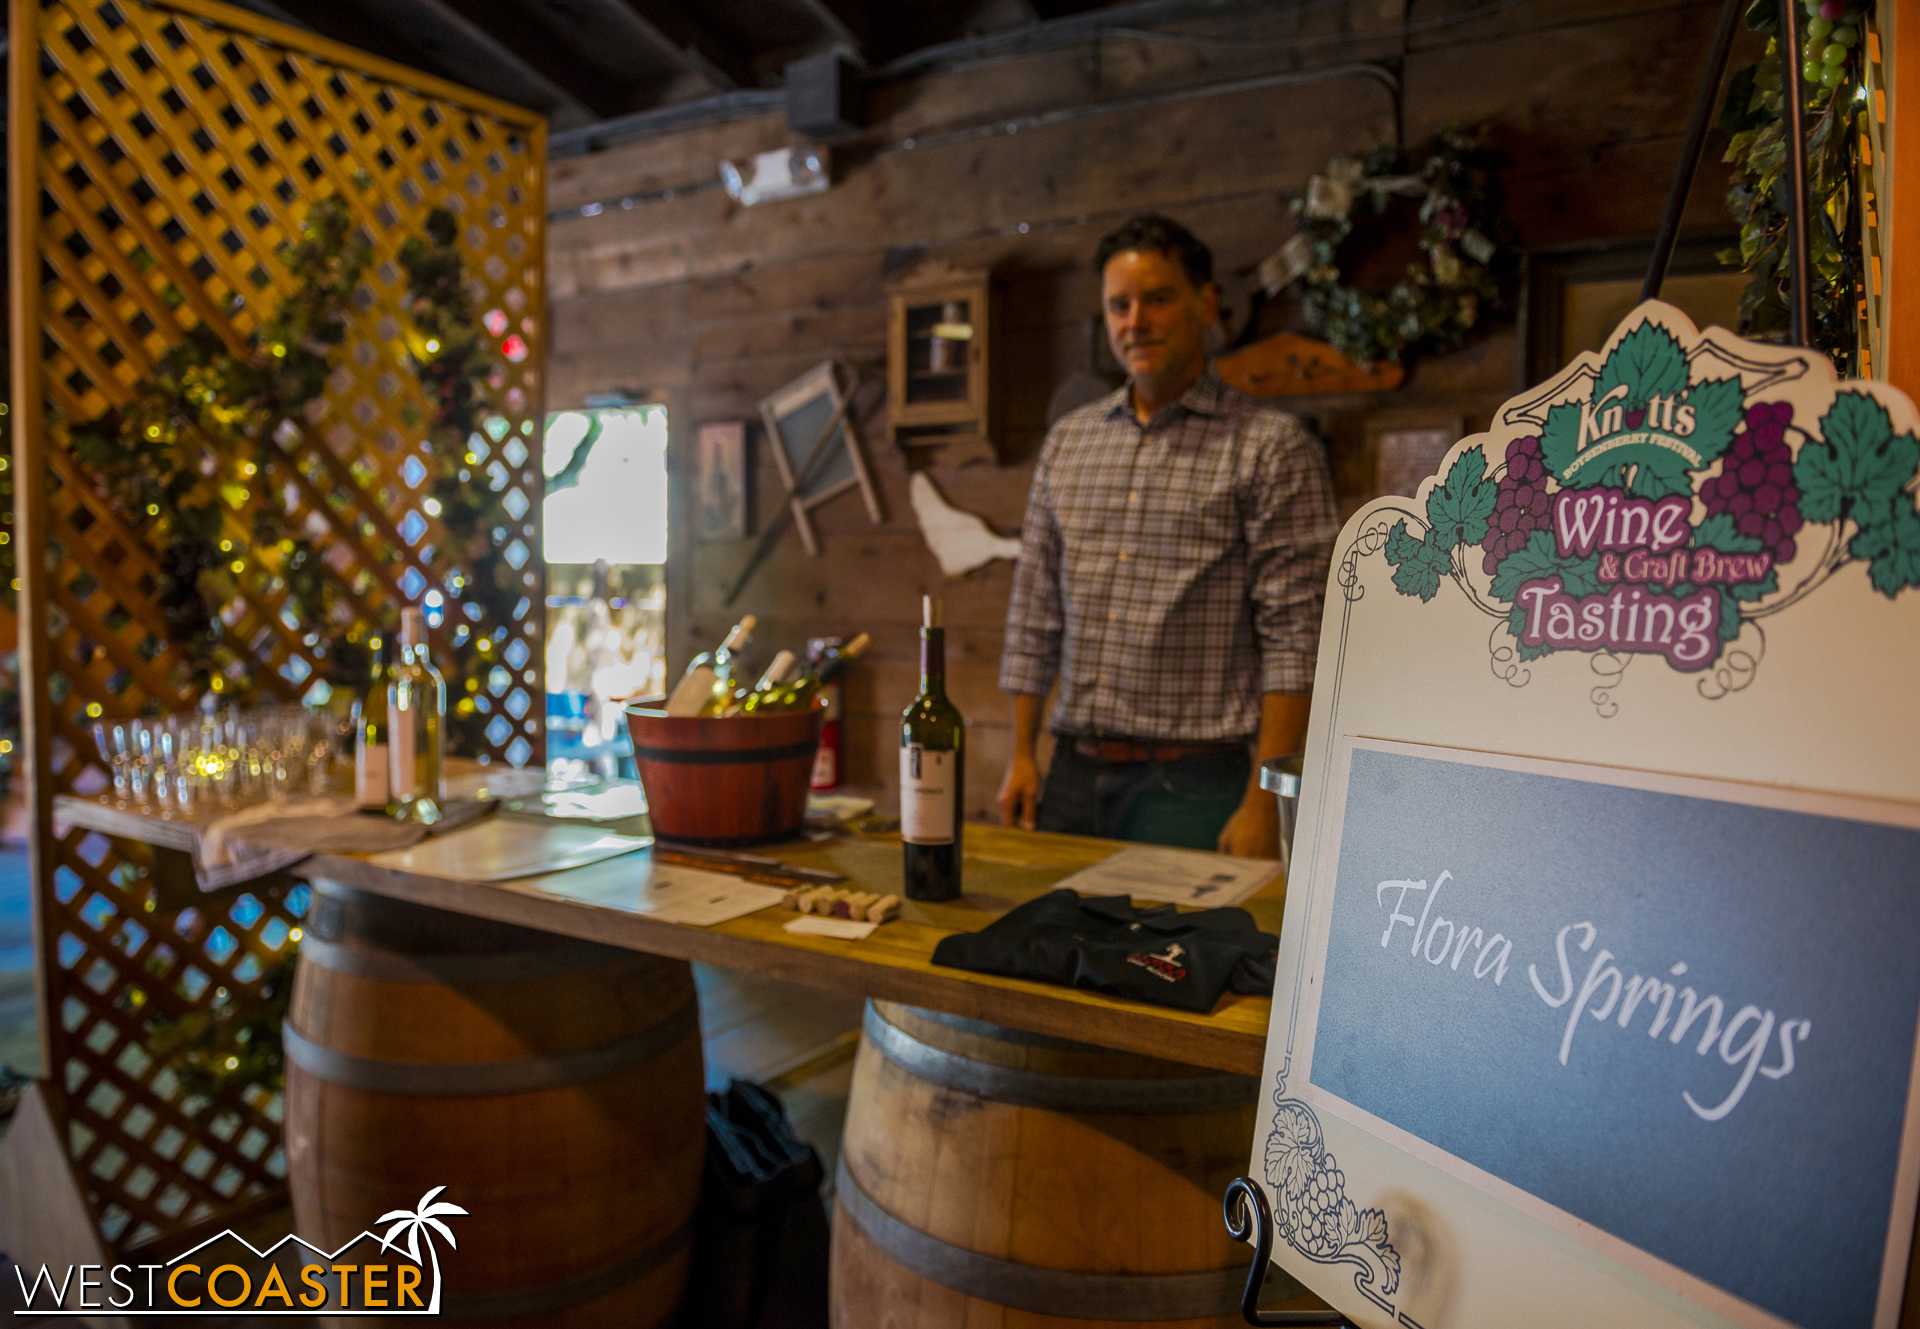  Most of the booths were manned by Knott's employees, but Flora Springs actually had someone from the winery who could speak intelligently about the wines and grapes. 